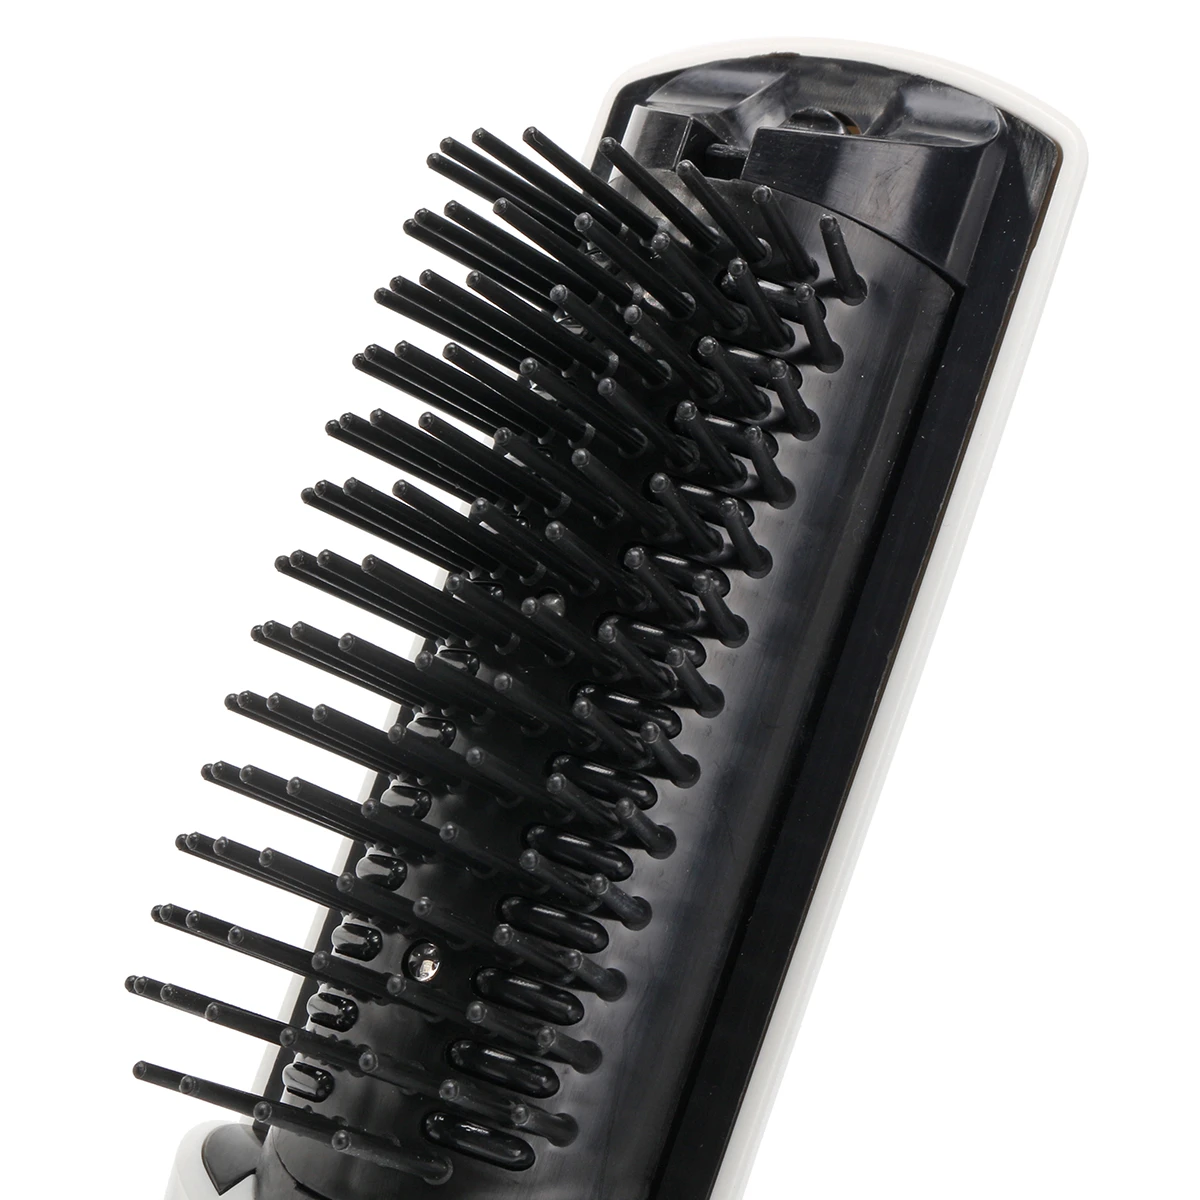 Laser Infrared Anti Hair Loss Hair Growth Regrowth Treatment Massage Comb